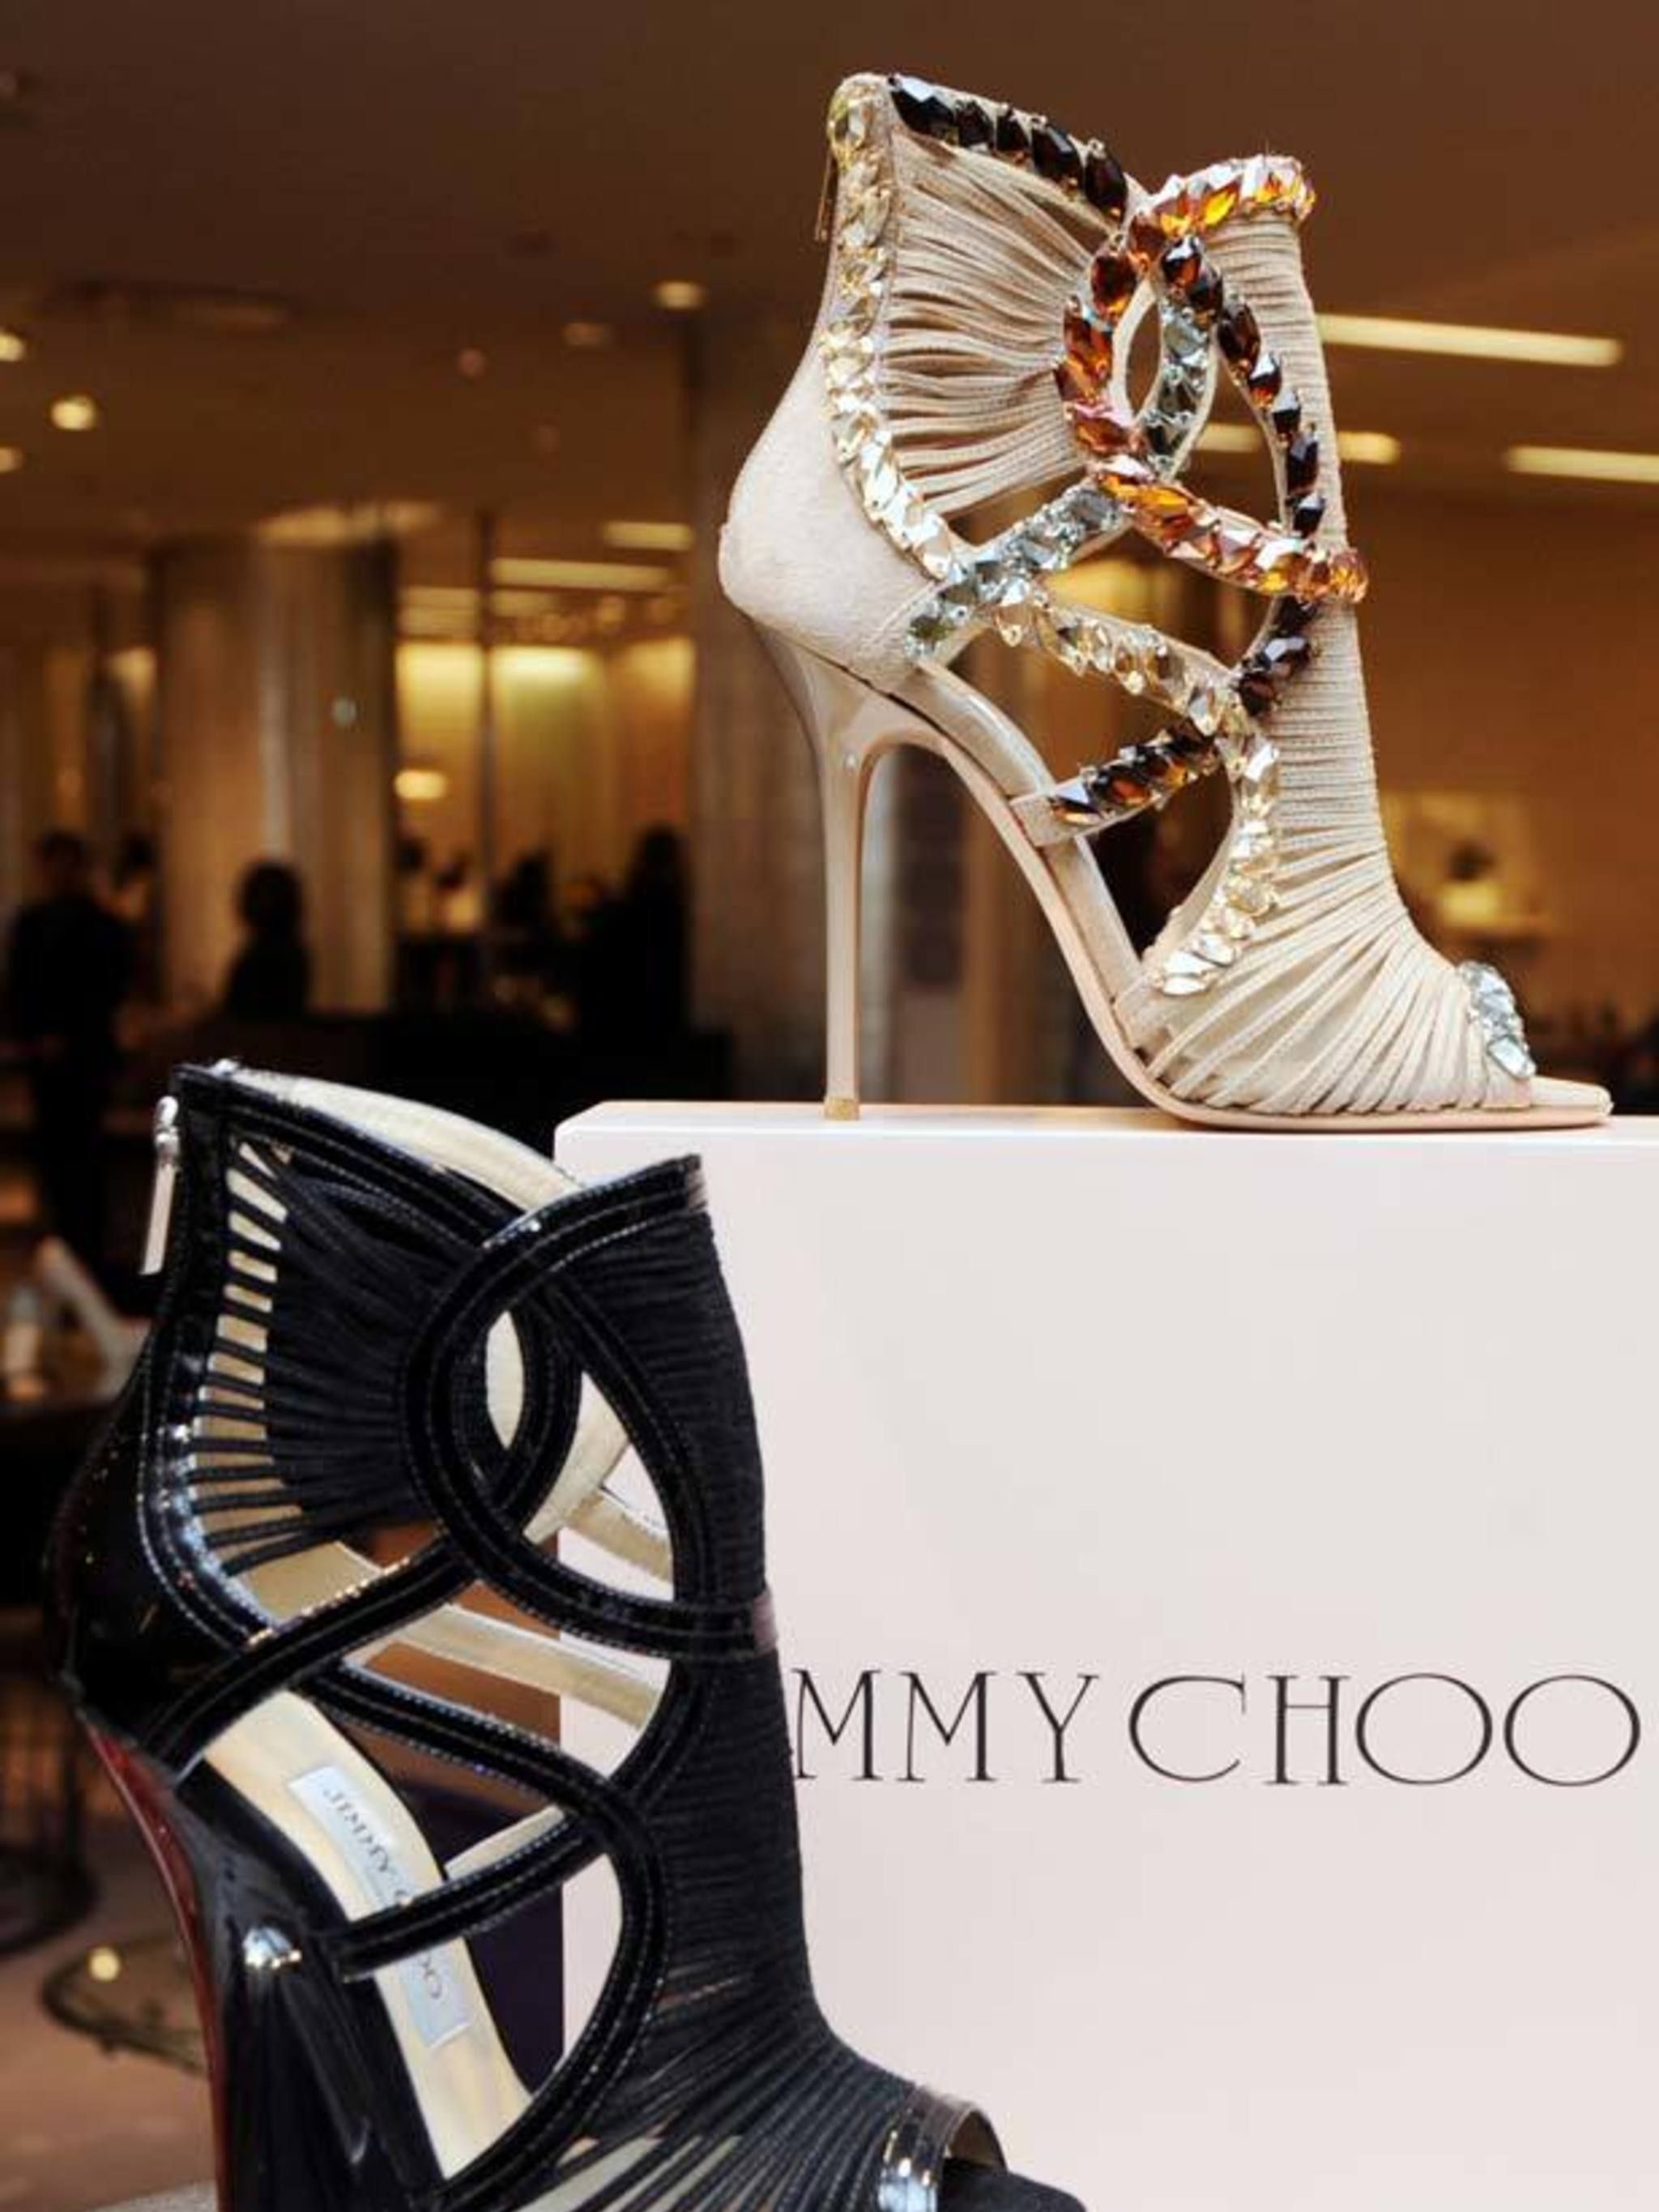 Jimmy Choo Is Up for Sale - Here Are 5 Outrageously Expensive Shoes and  Bags It Currently Sells - TheStreet